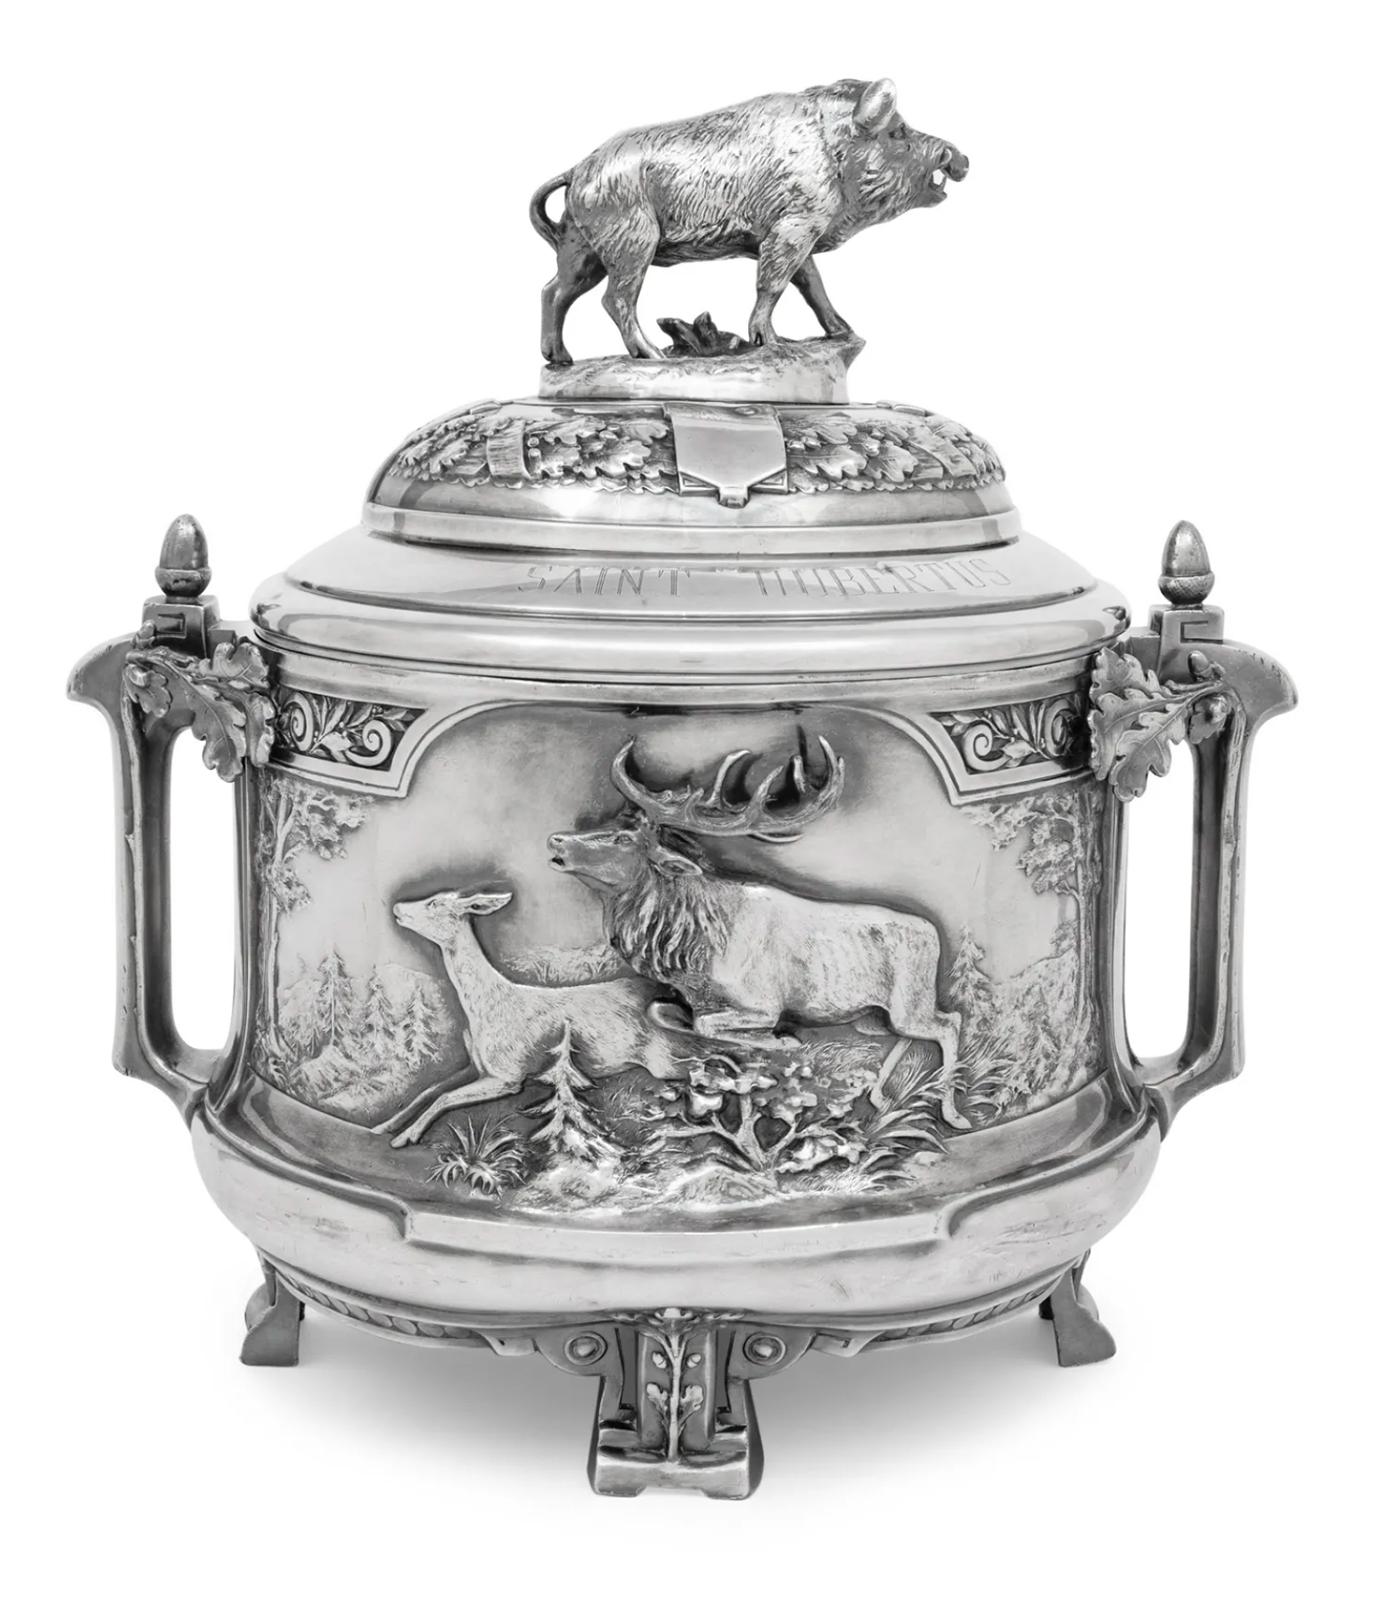 An early 20th century silver-plate tureen from the Saint Hubertus Hunting Lodge, Gelderland, Netherlands. The spacer is engraved with St. Hubertus-Lodge. 

Dimensions: 18